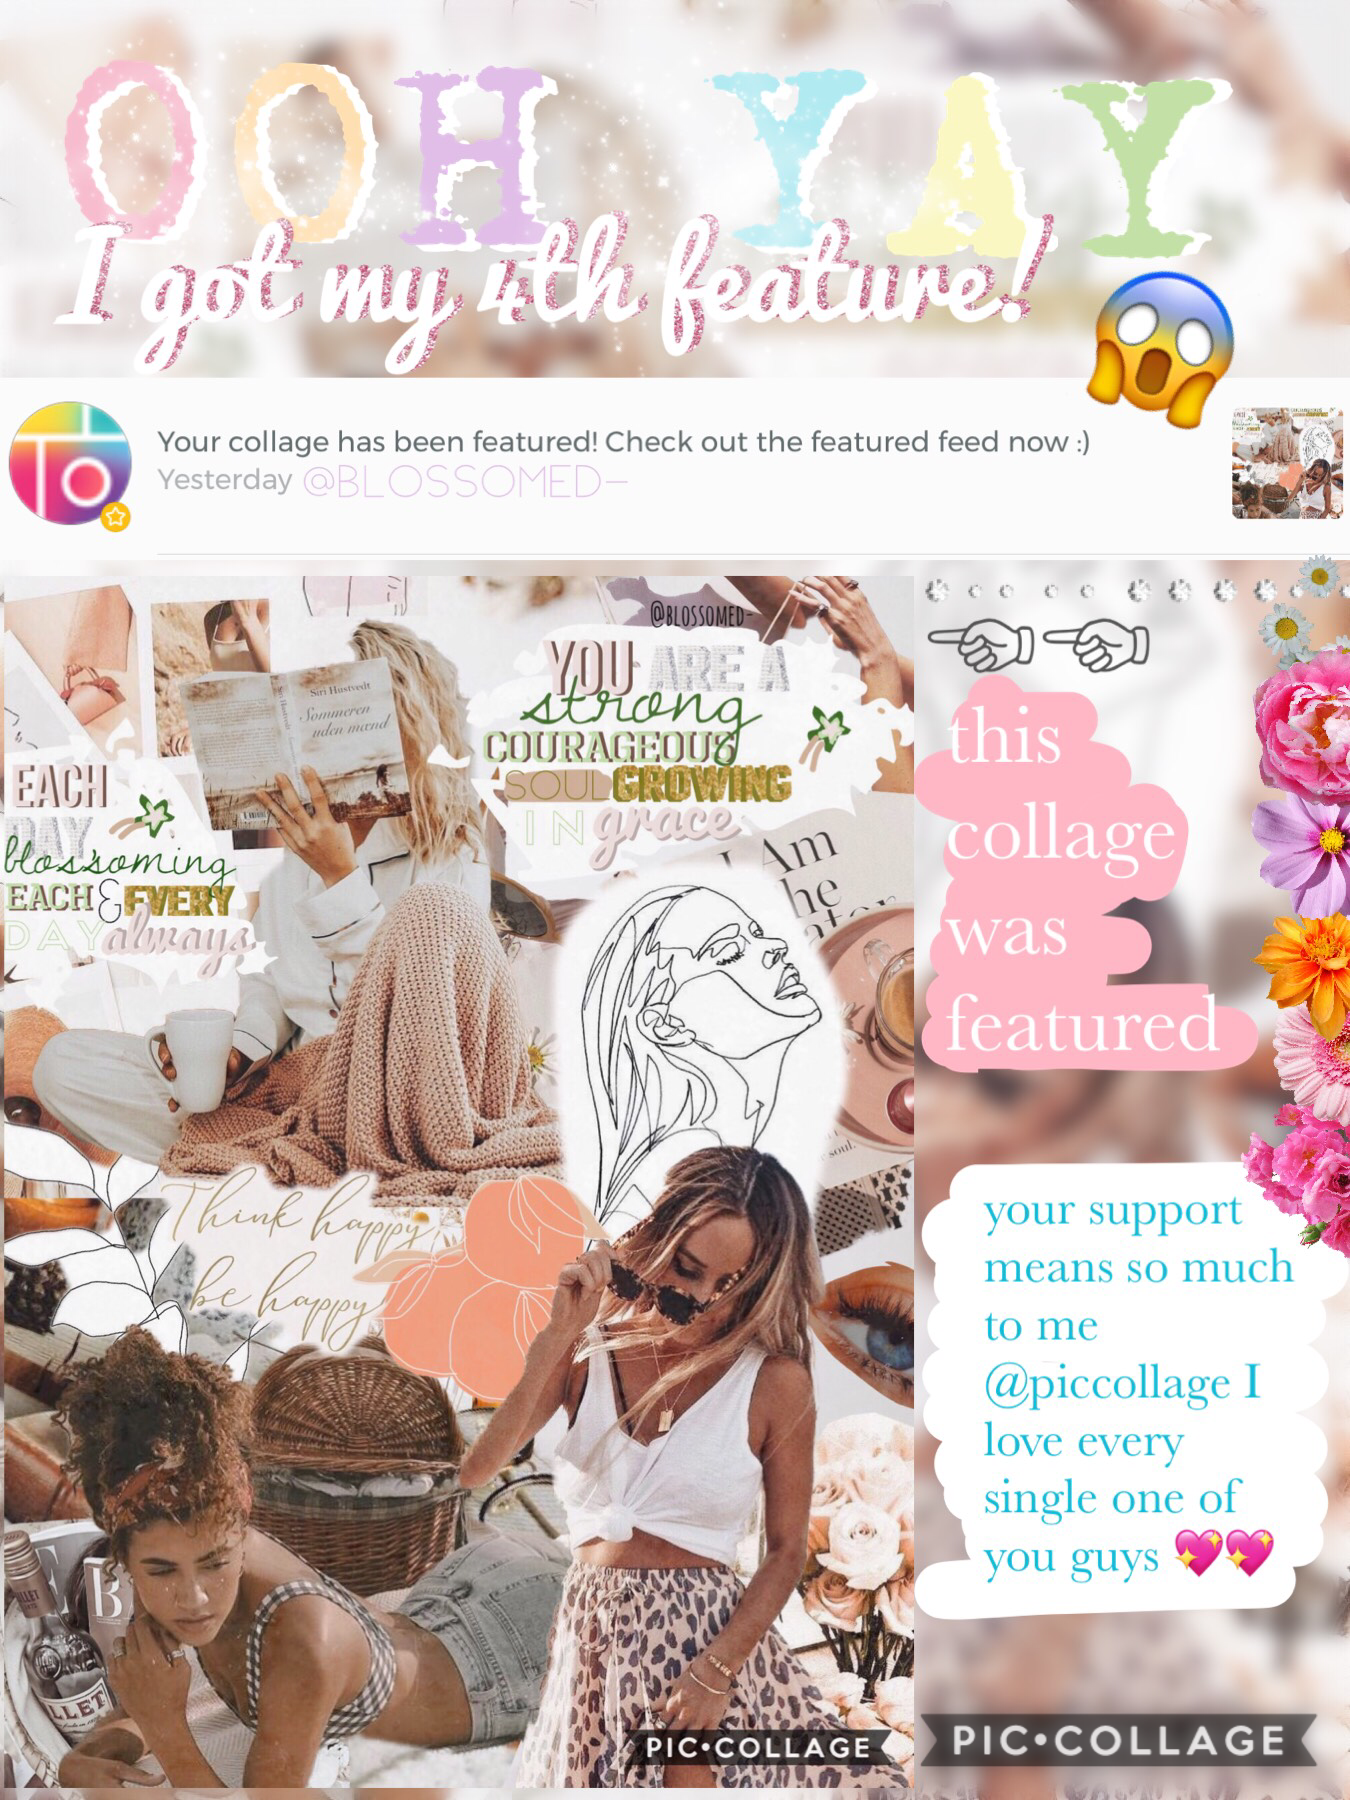 hiya everyone🌿 whoa I’m so grateful for this💖 it means the world to me literally⚡️🍋 pic collage is really important to me so thank you for making it special for me🍡🌞 yee a new edit coming soon!! get exciteddd haha🥰